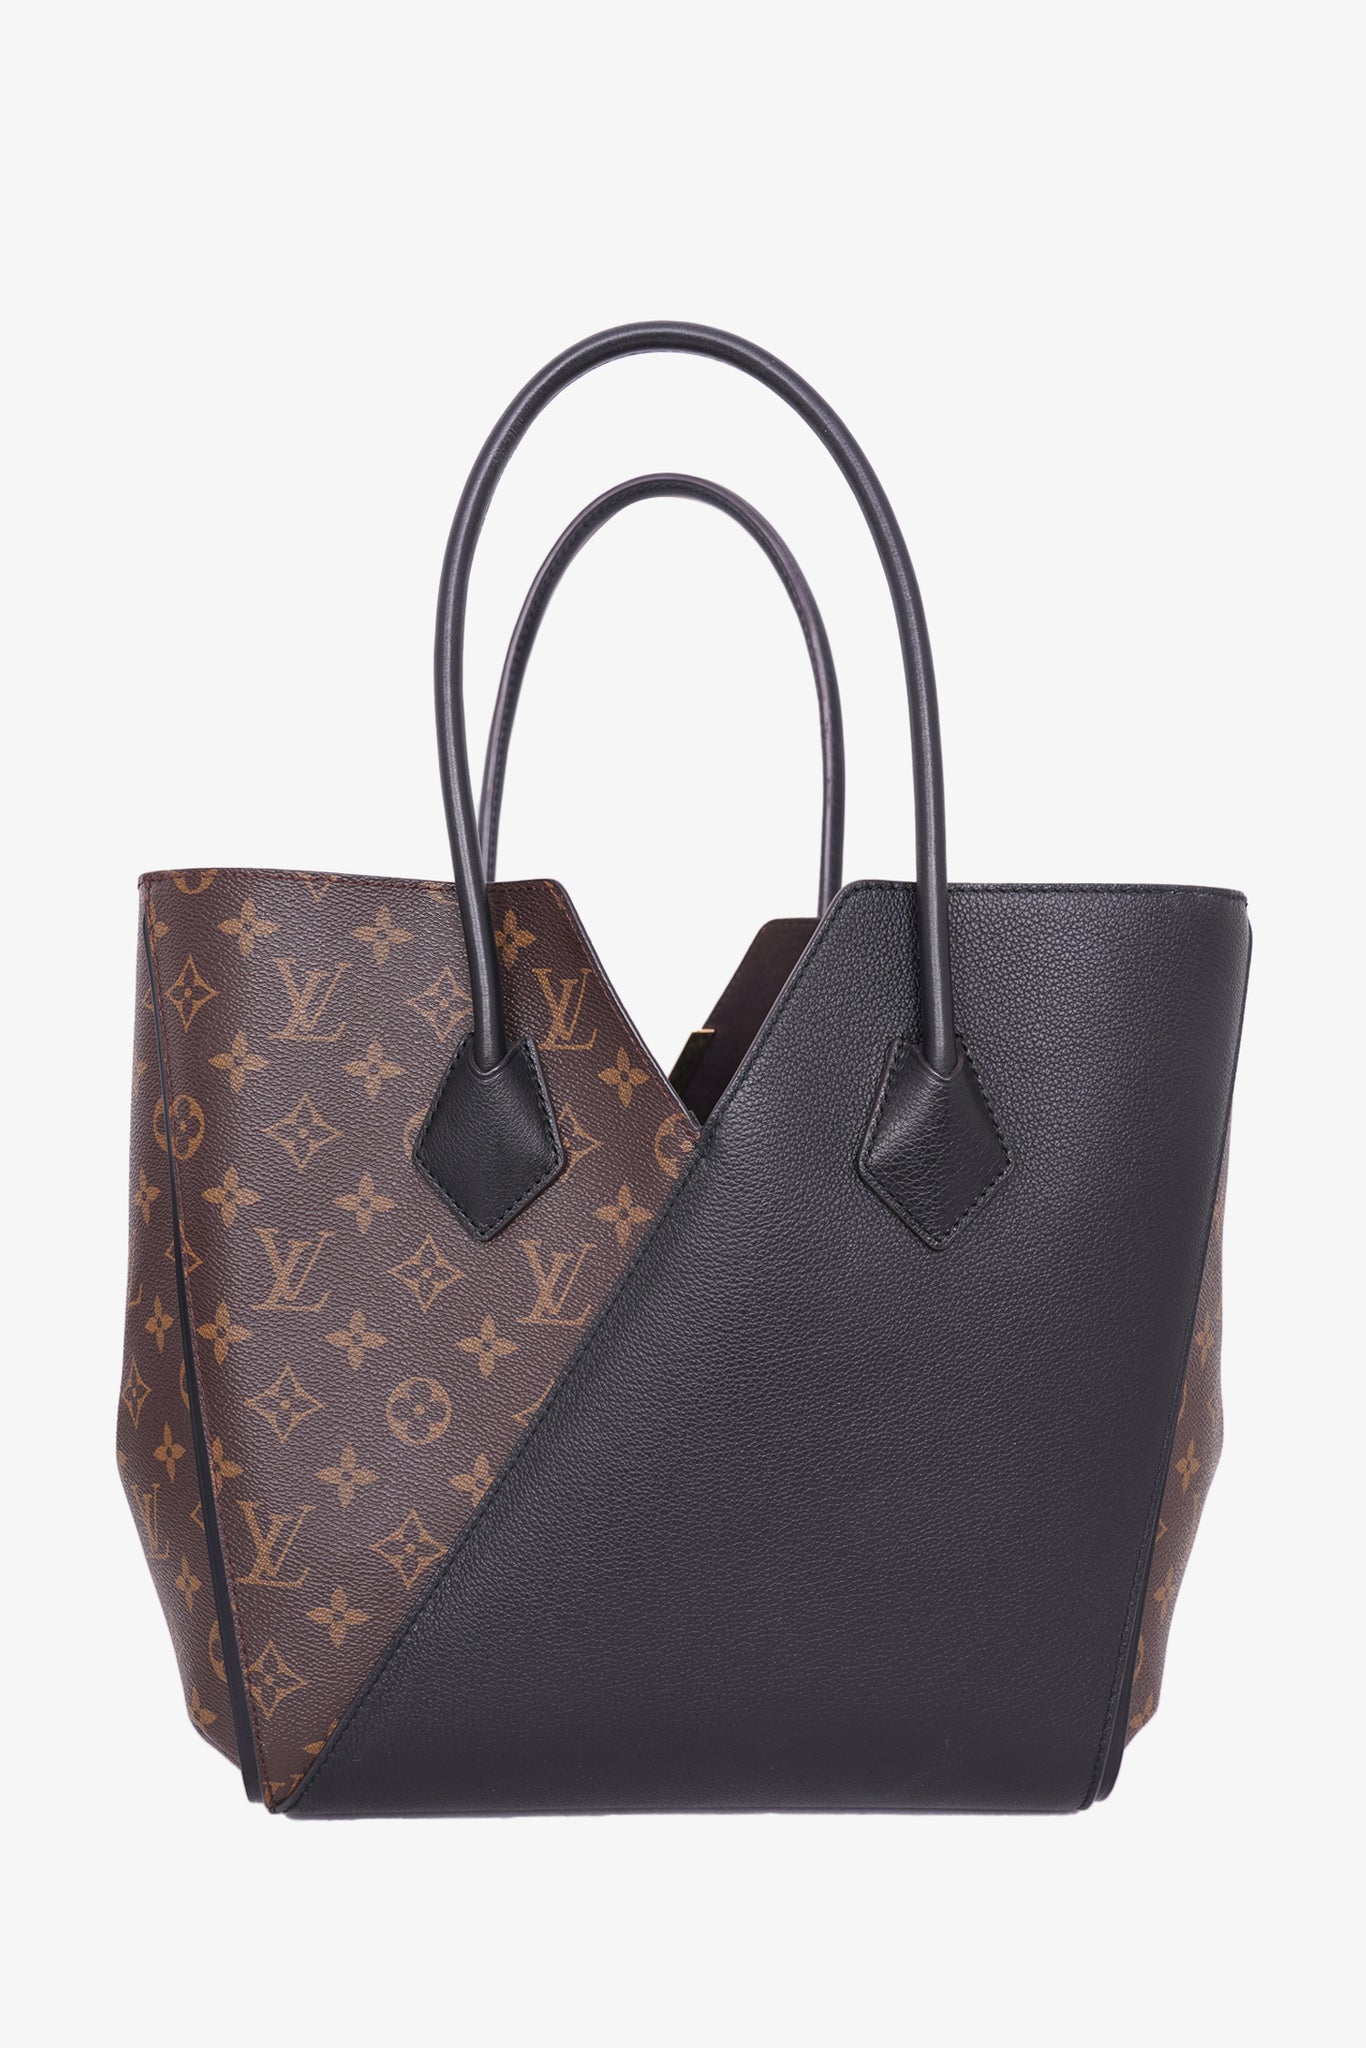 Authentic Louis Vuitton MM Neverful - clothing & accessories - by owner - apparel  sale - craigslist